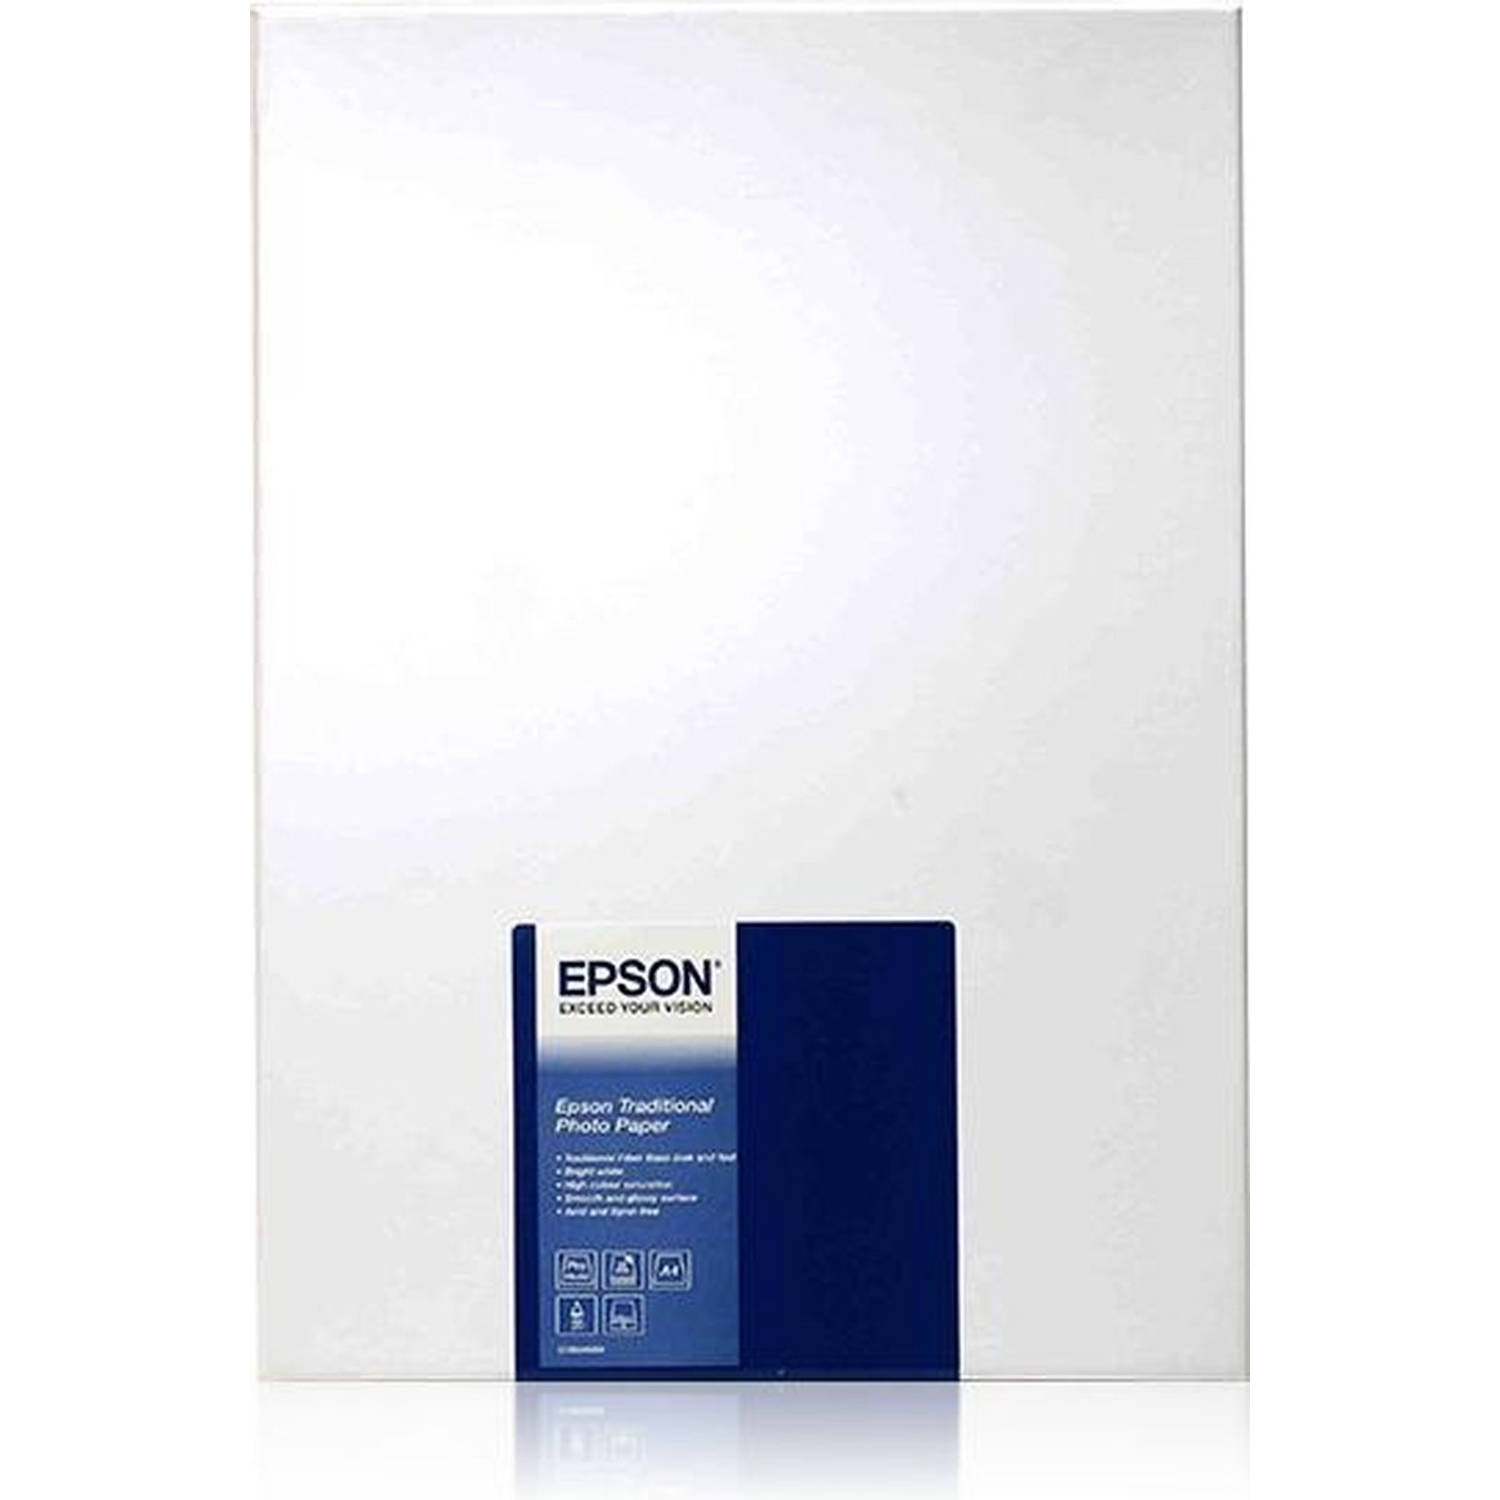 Epson Traditional Photo Paper, DIN A4, 330g-m², 25 Vel